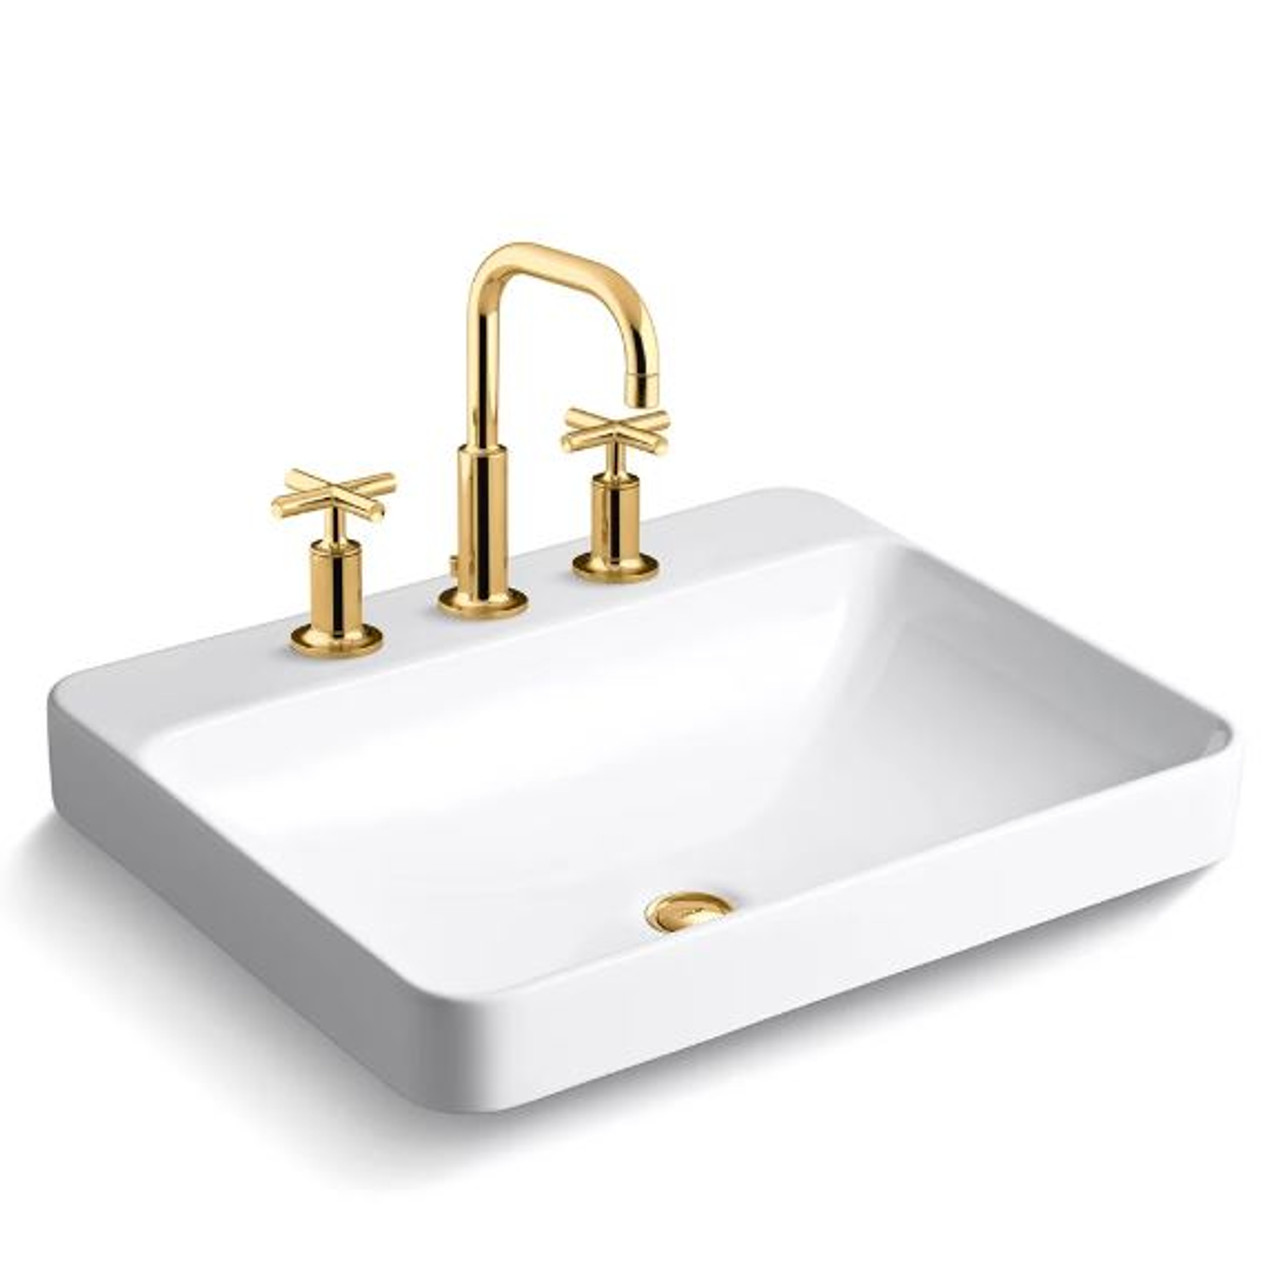 Kohler Vox 22 Vessel Sink With Overflow And Purist Widespread Bathroom Faucet With Pop Up Drain Assembly Royal Bath Place